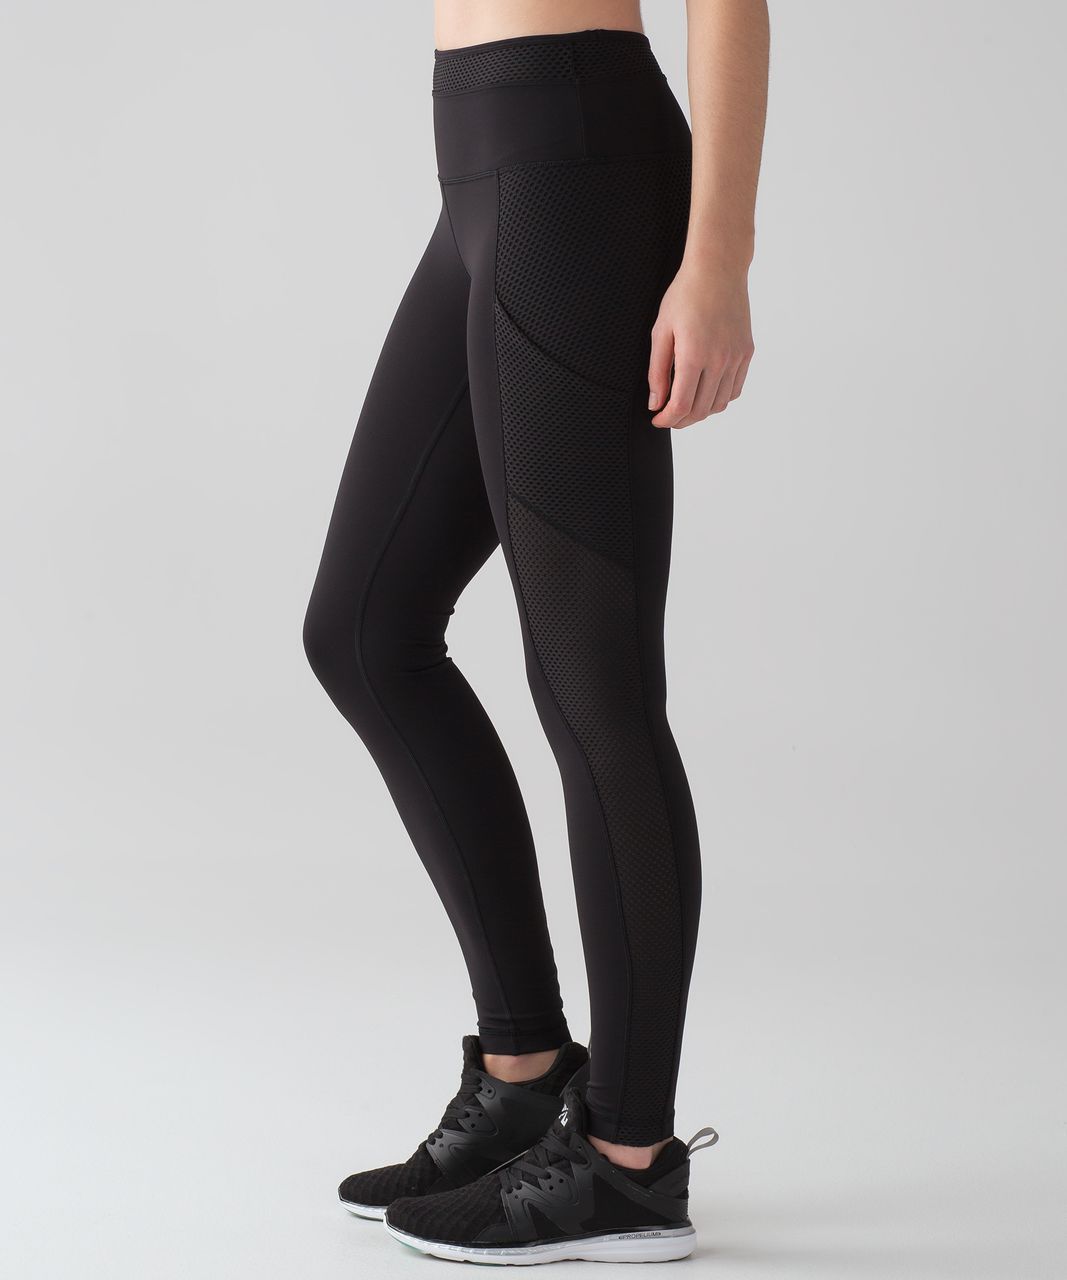 lululemon tights with side pockets